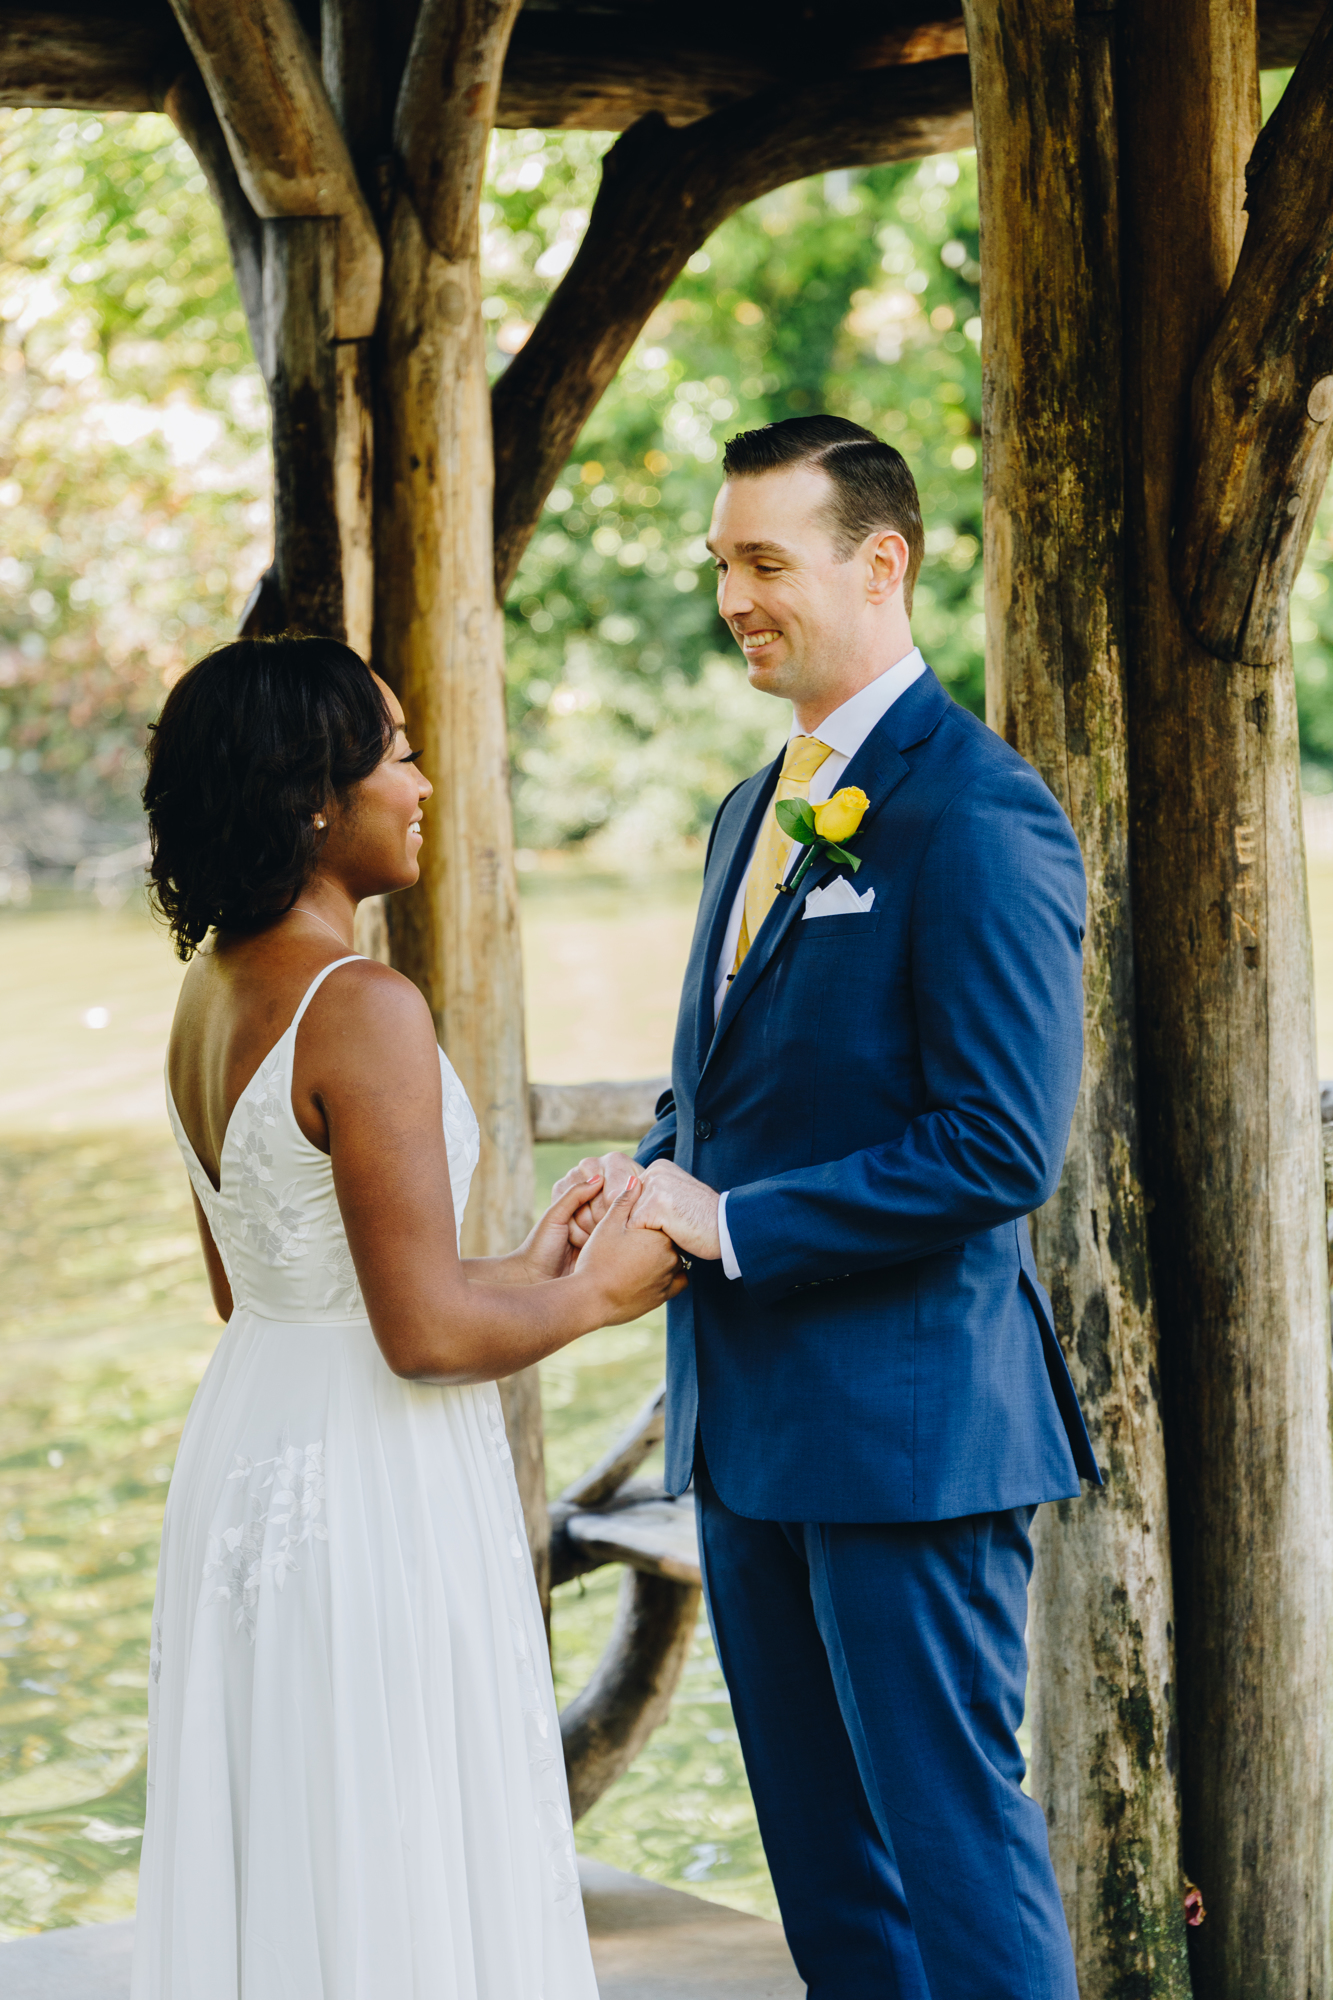 Candid Wagner Cove Elopement in New York City's Beautiful Central Park